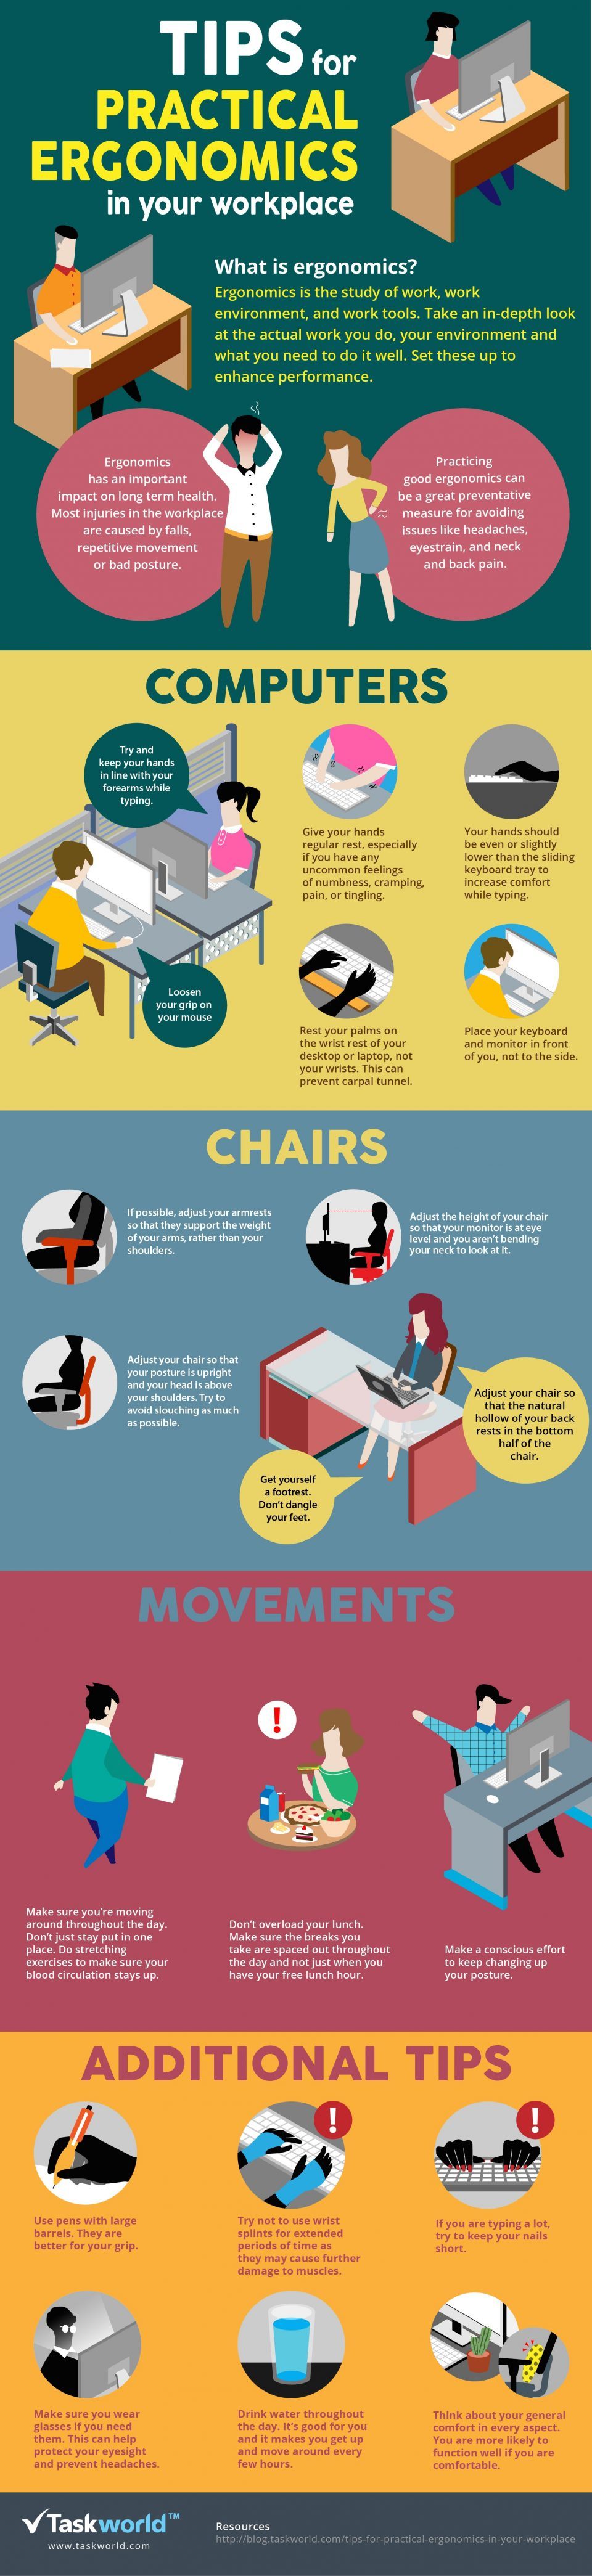 Tips for Practical Ergonomics in Your Workplace Infographic